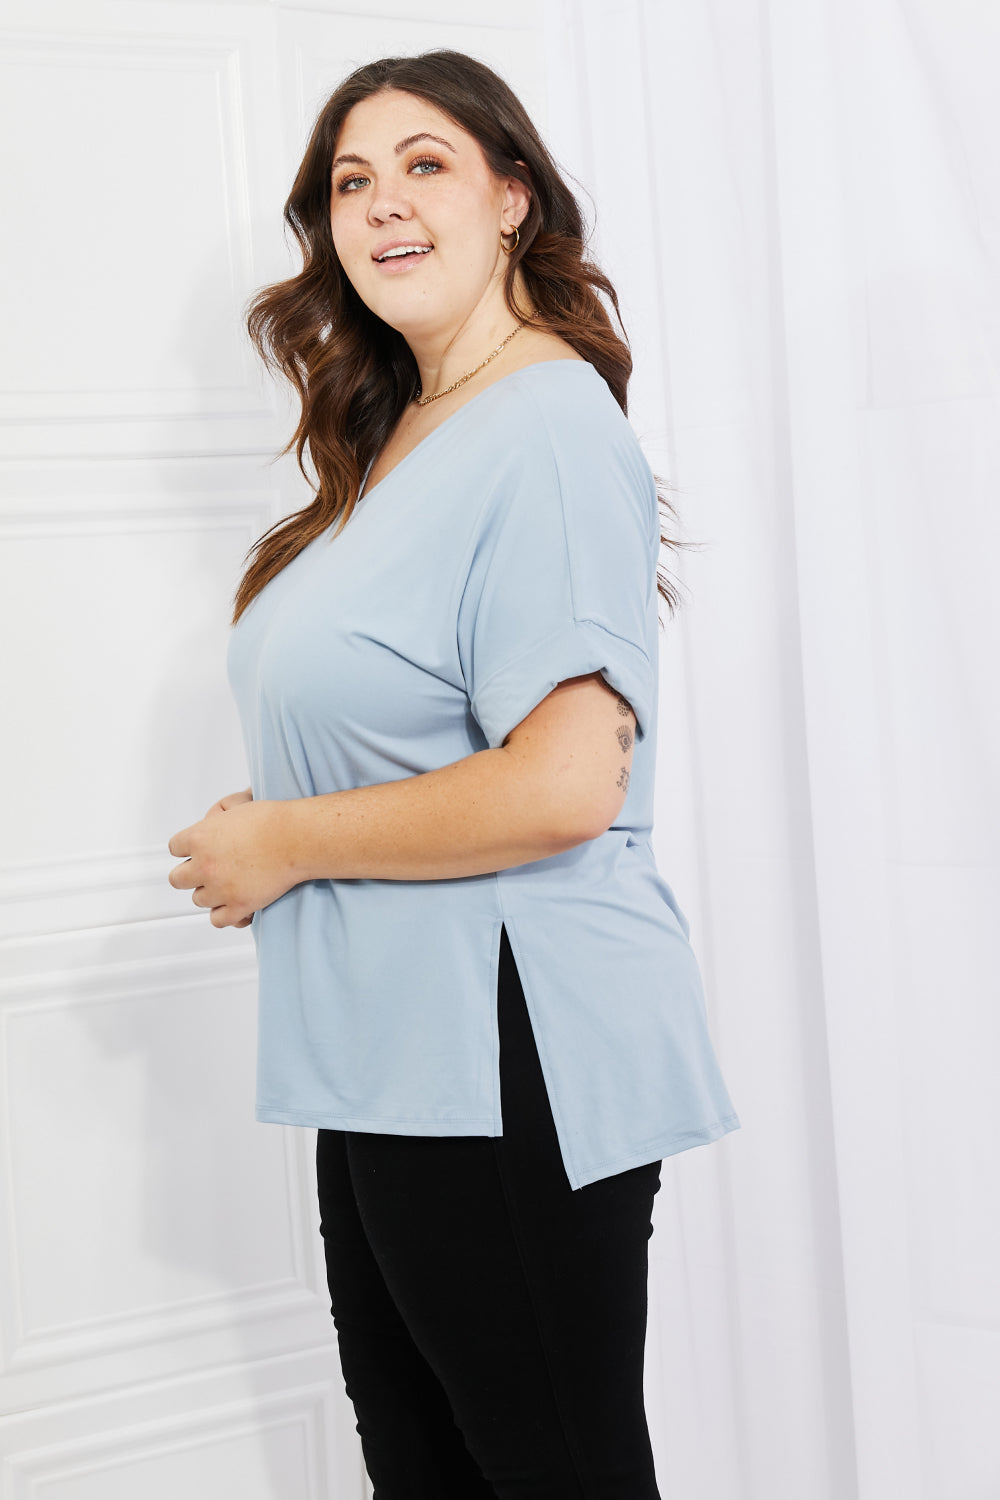 Comfy V-Neck Loose Fit T-Shirt in Blue | Tigbul's Variety